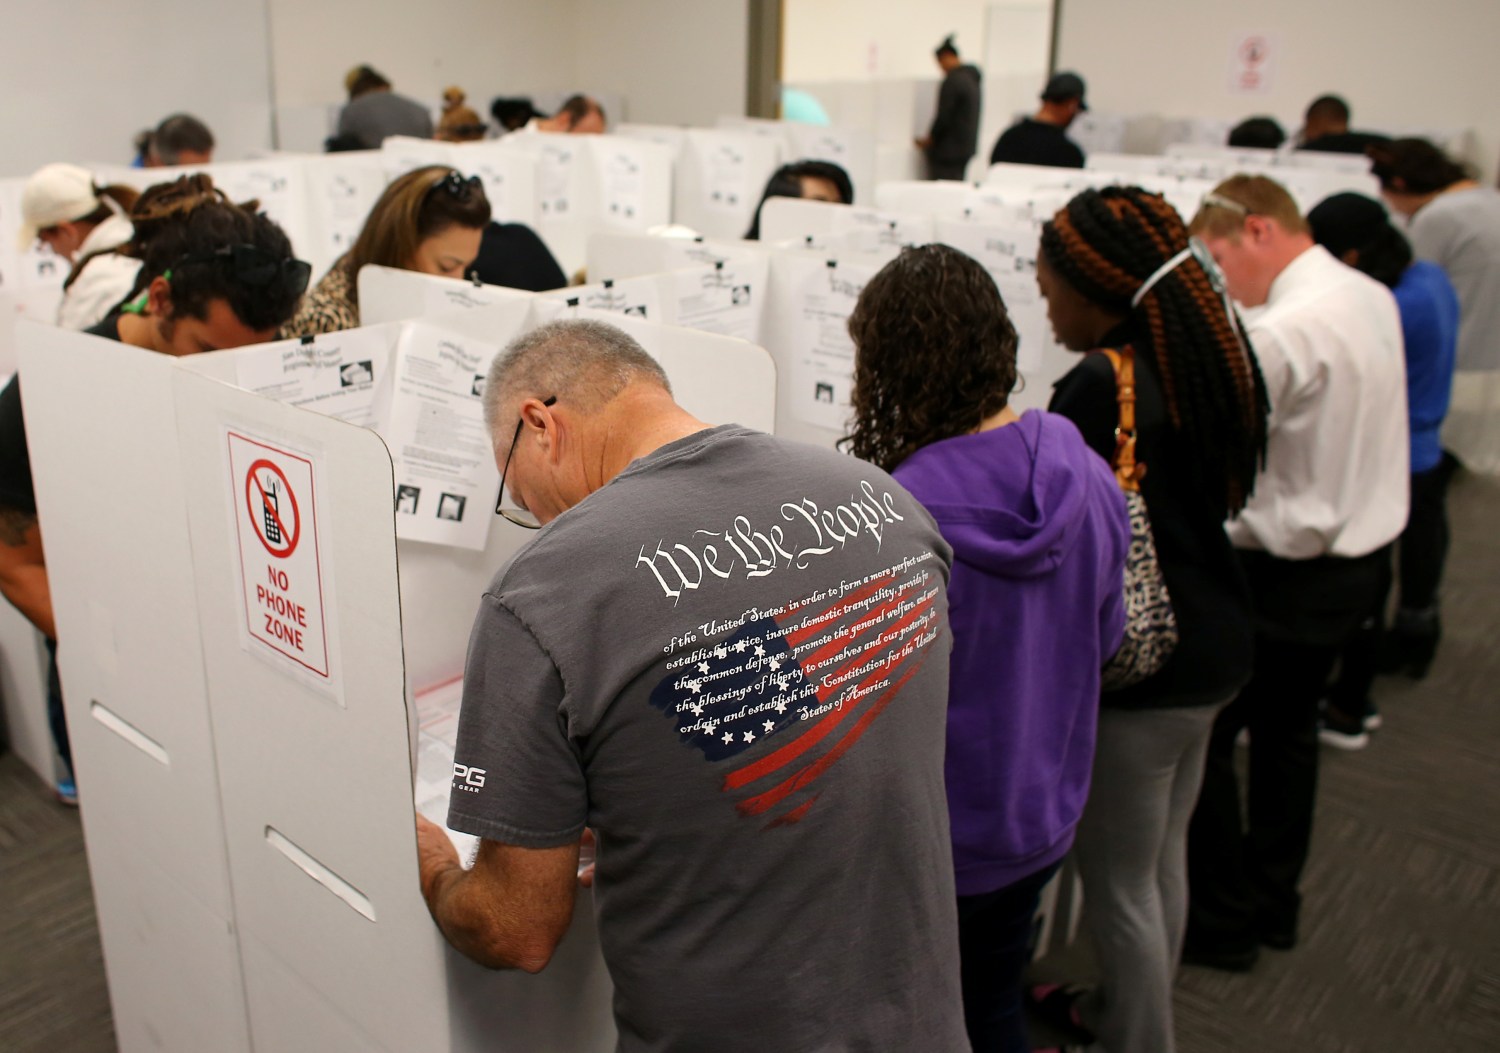 A voter wears a shirt with words from the United States Constitution while casting his ballot early as long lines of voters vote at the San Diego County Elections Office in San Diego, California, U.S., November 7, 2016.